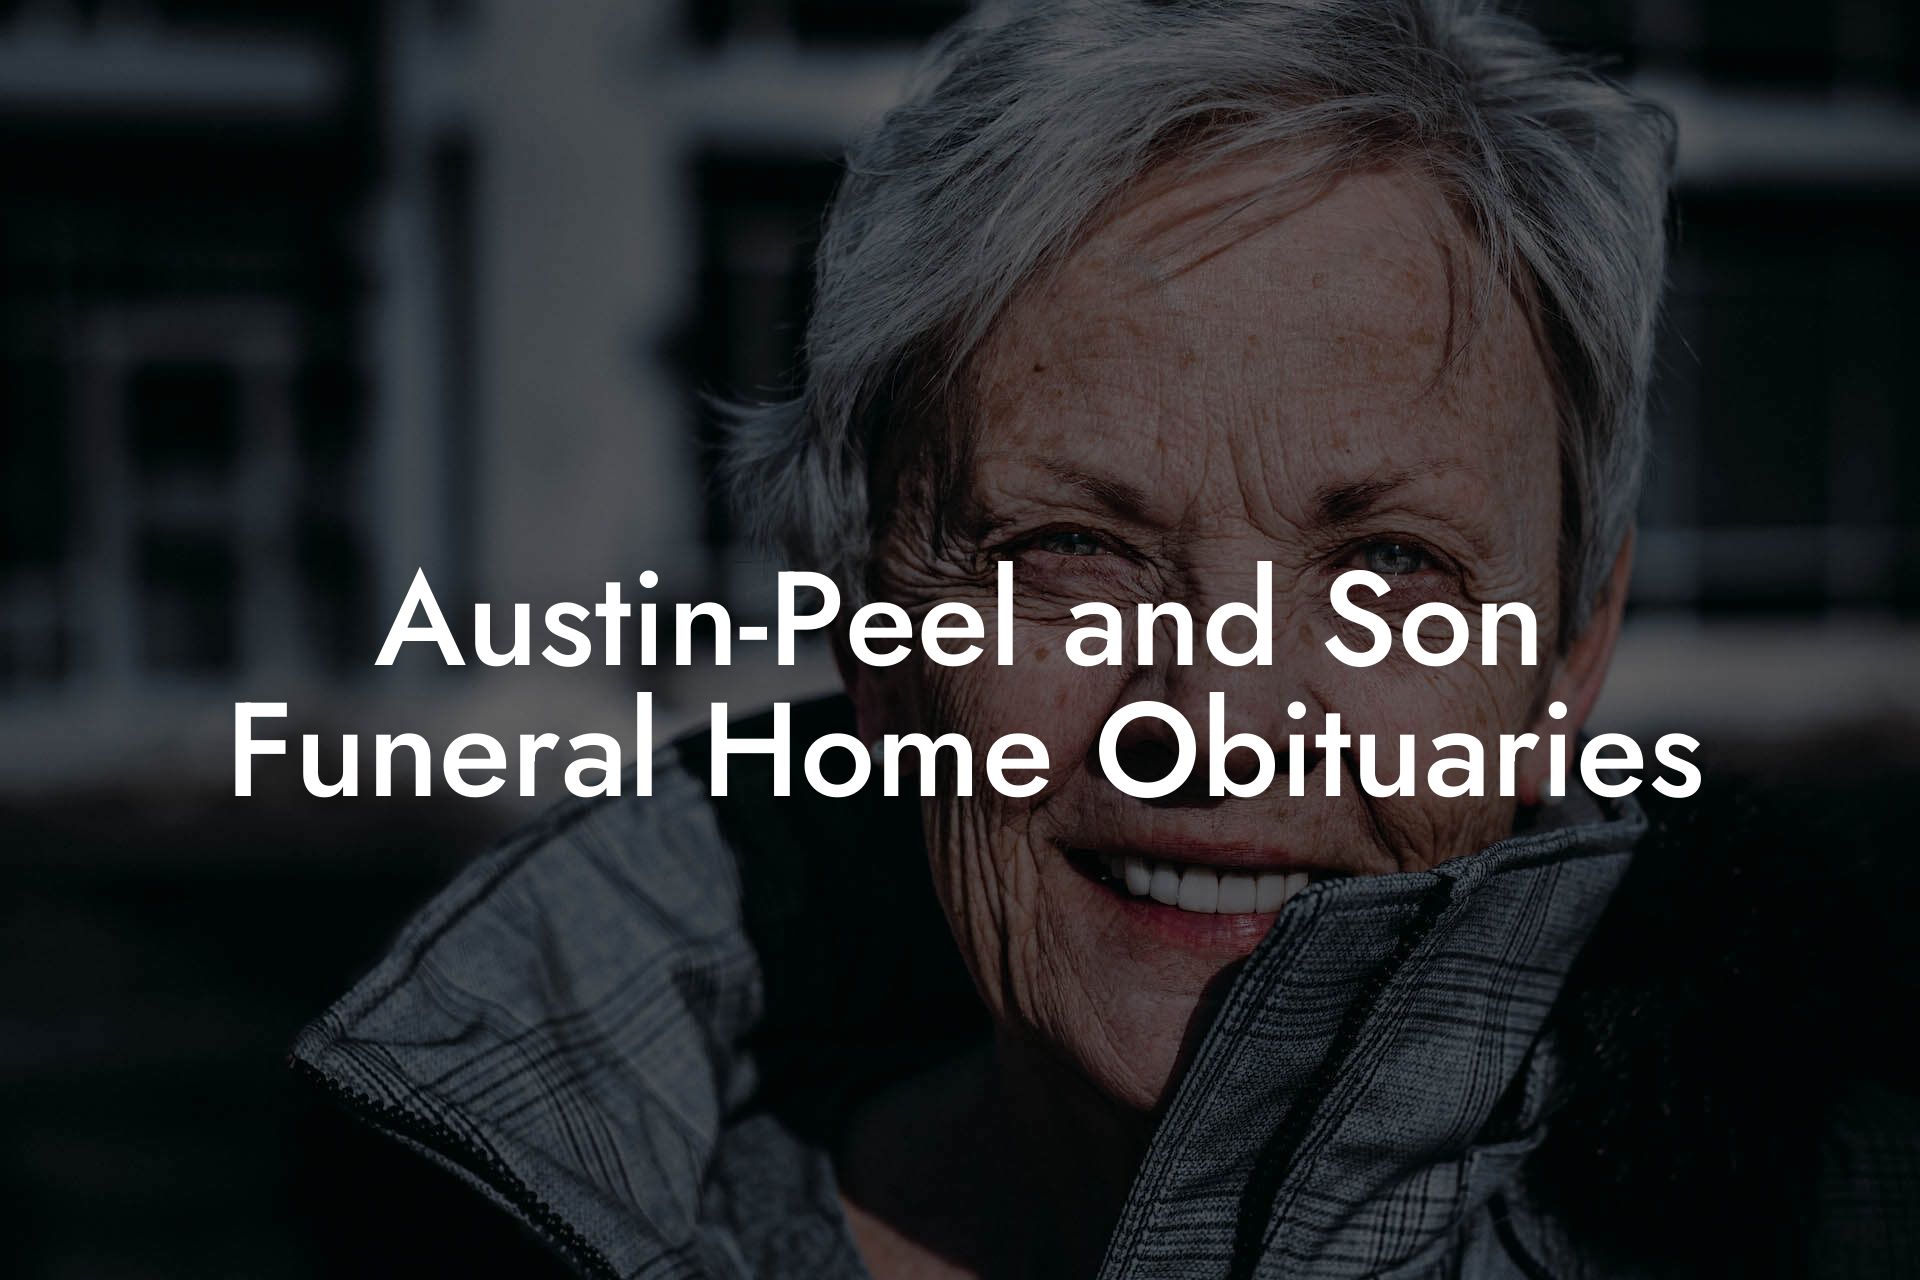 Austin-Peel and Son Funeral Home Obituaries